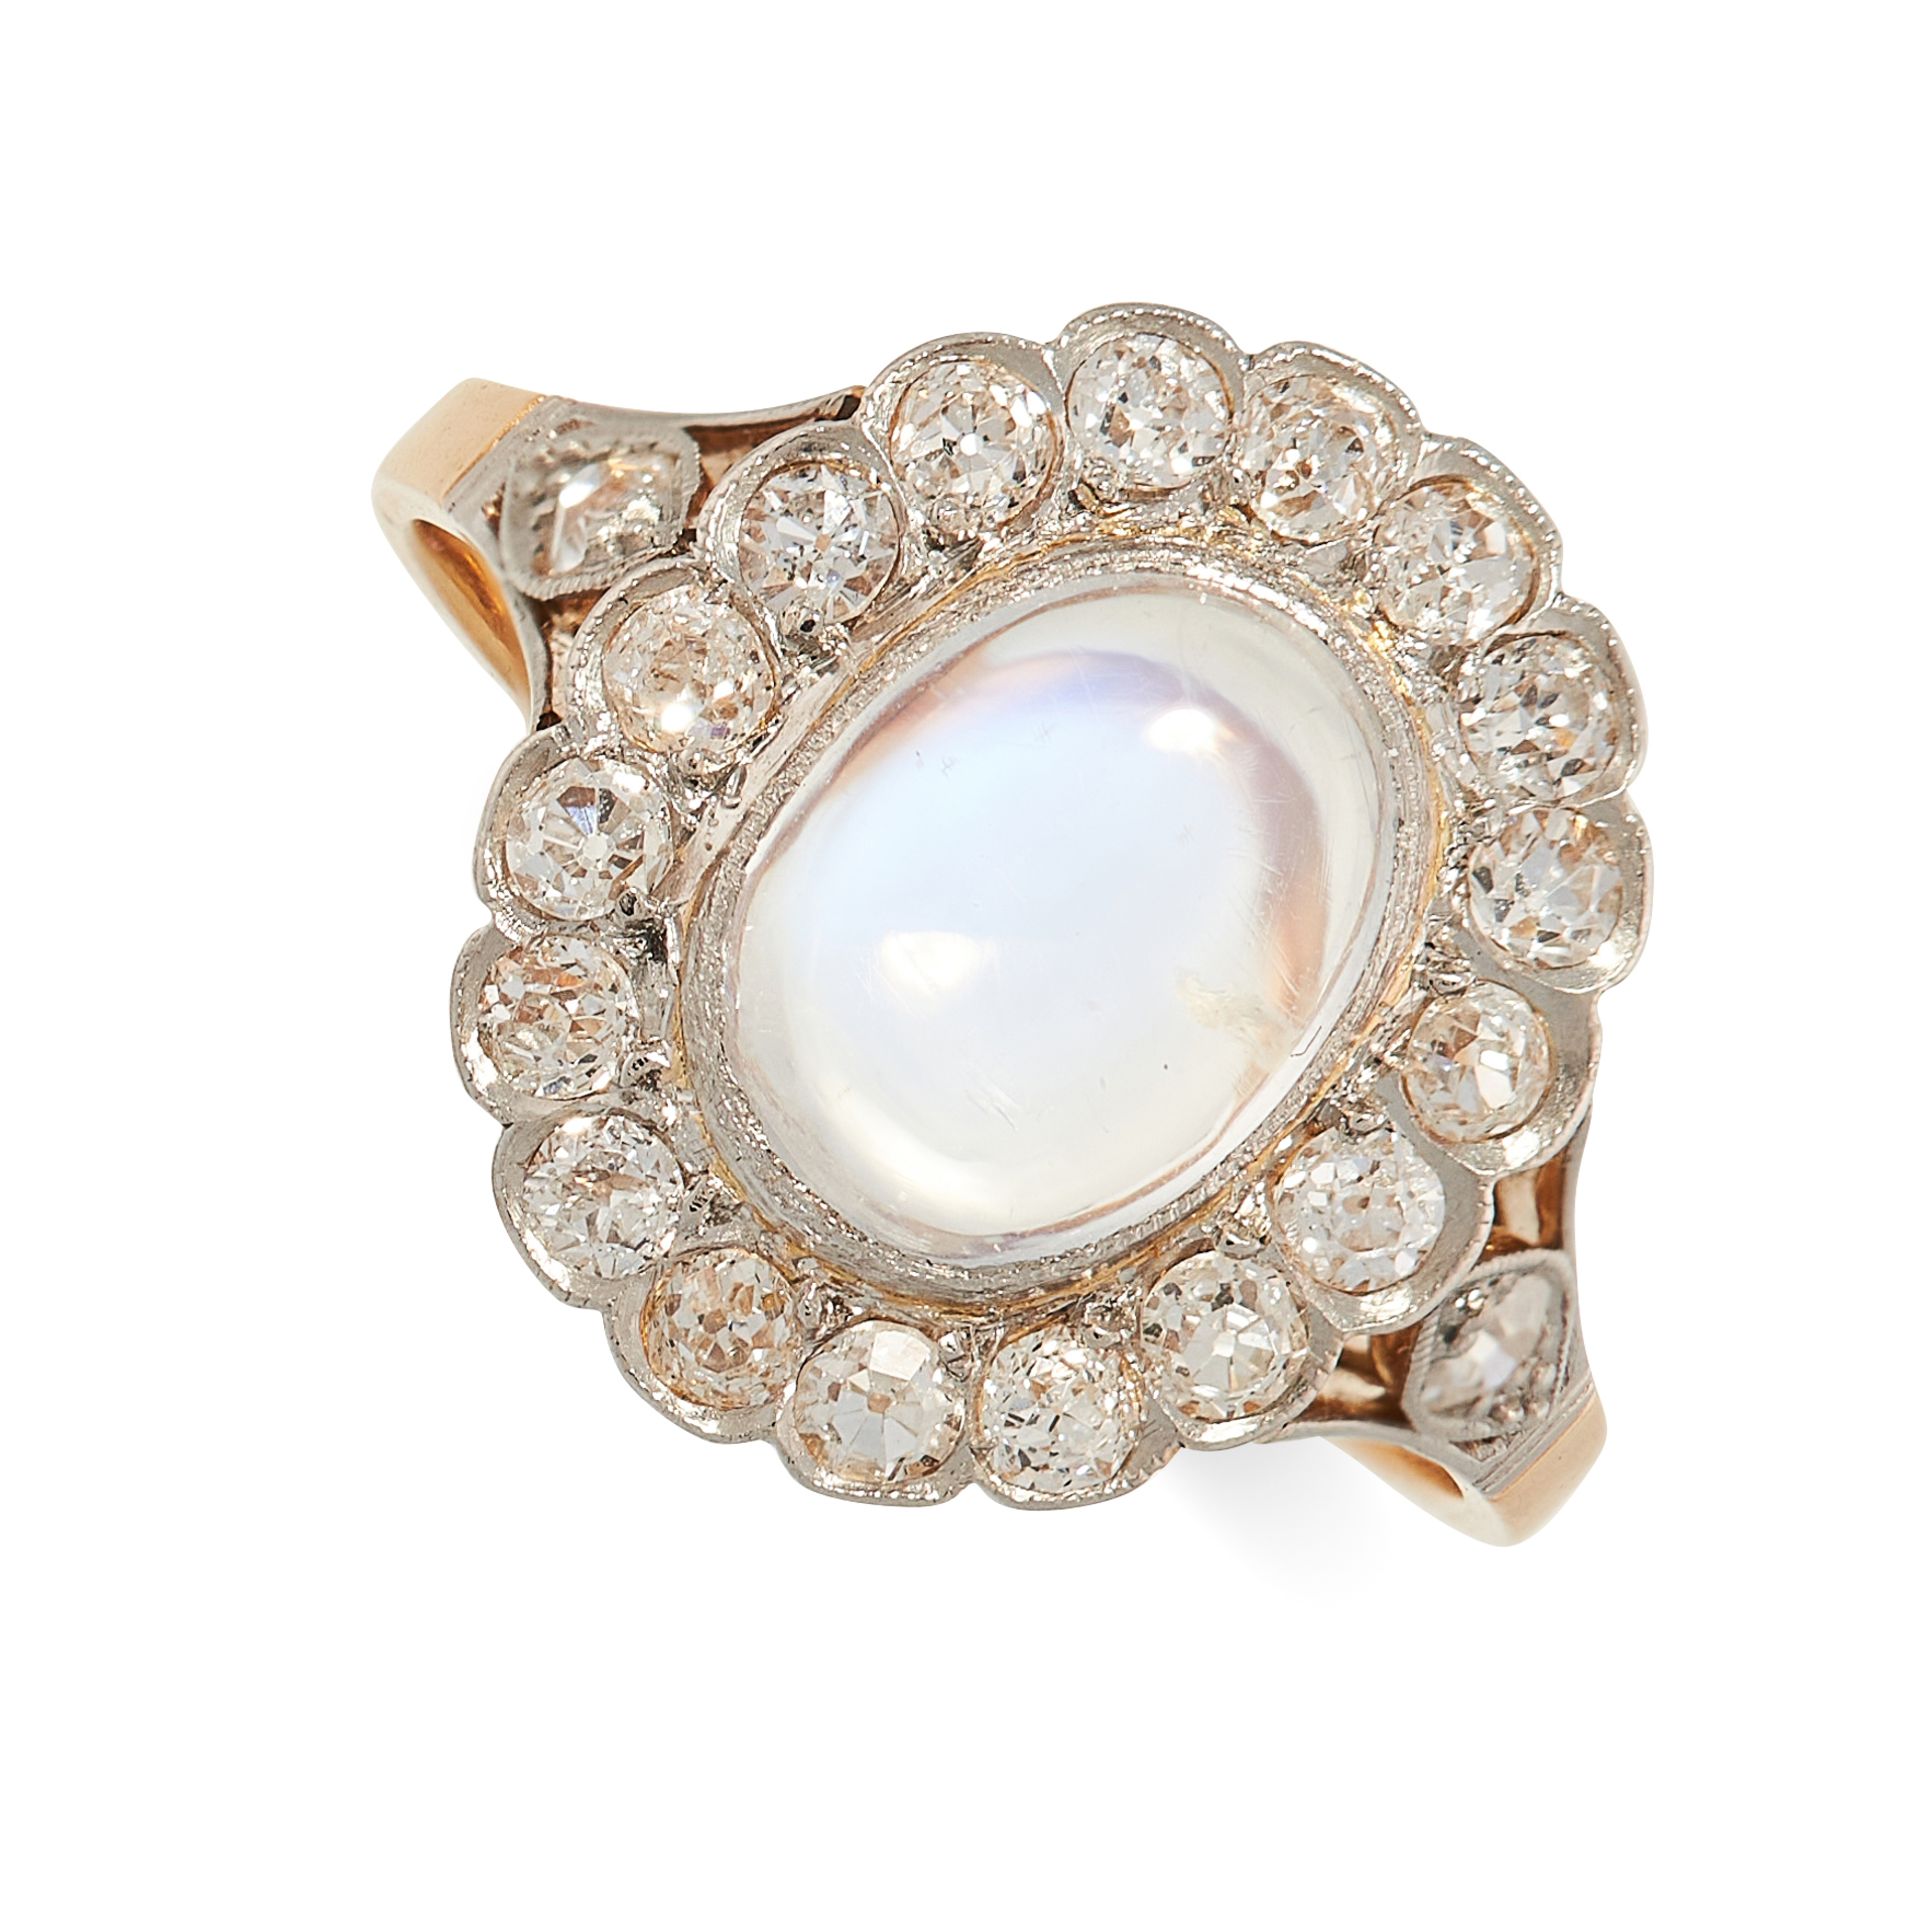 AN ANTIQUE MOONSTONE AND DIAMOND RING, CIRCA 1900 in yellow gold, set with an oval cabochon